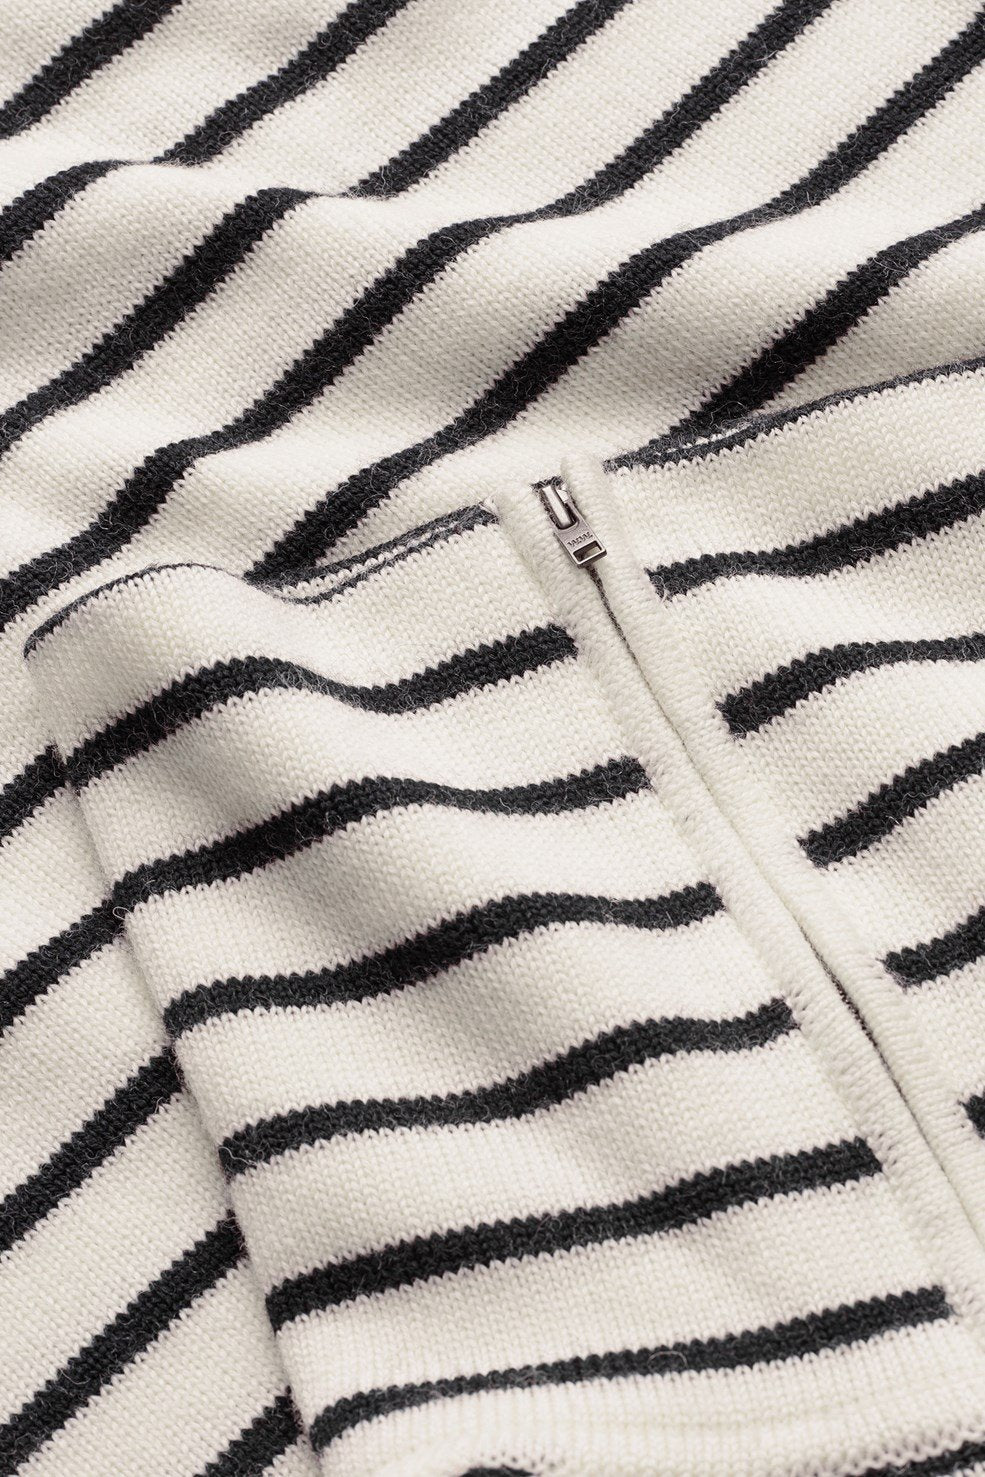 CLEMENTINE JUMPER IN NAVY WHITE STRIPES BY WOOD WOOD